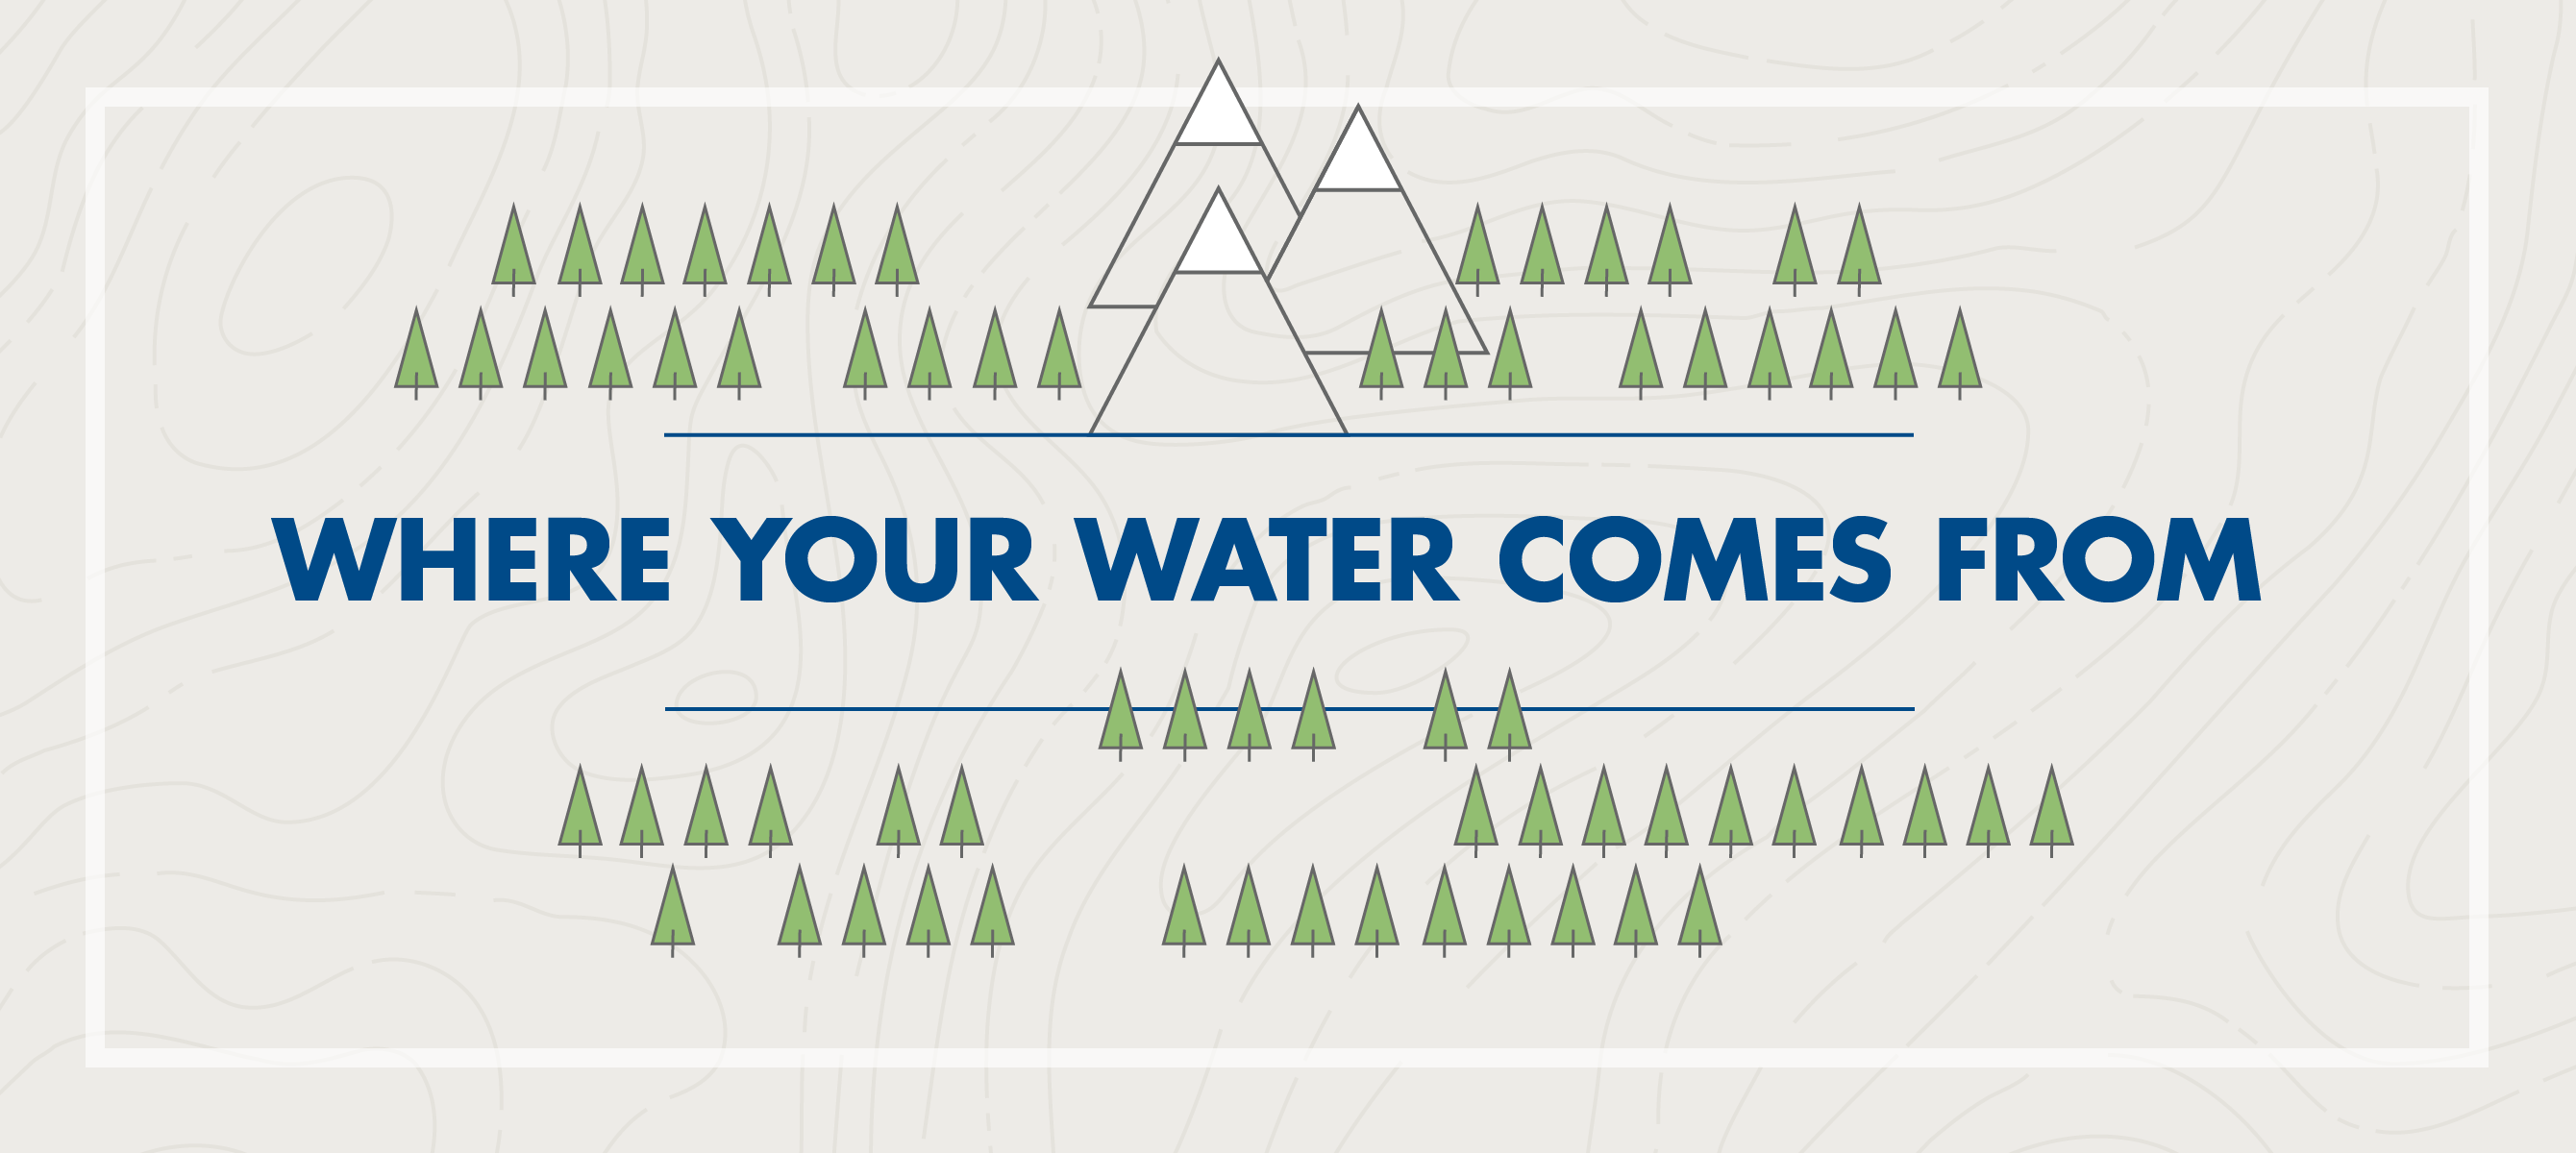 Where your water comes from